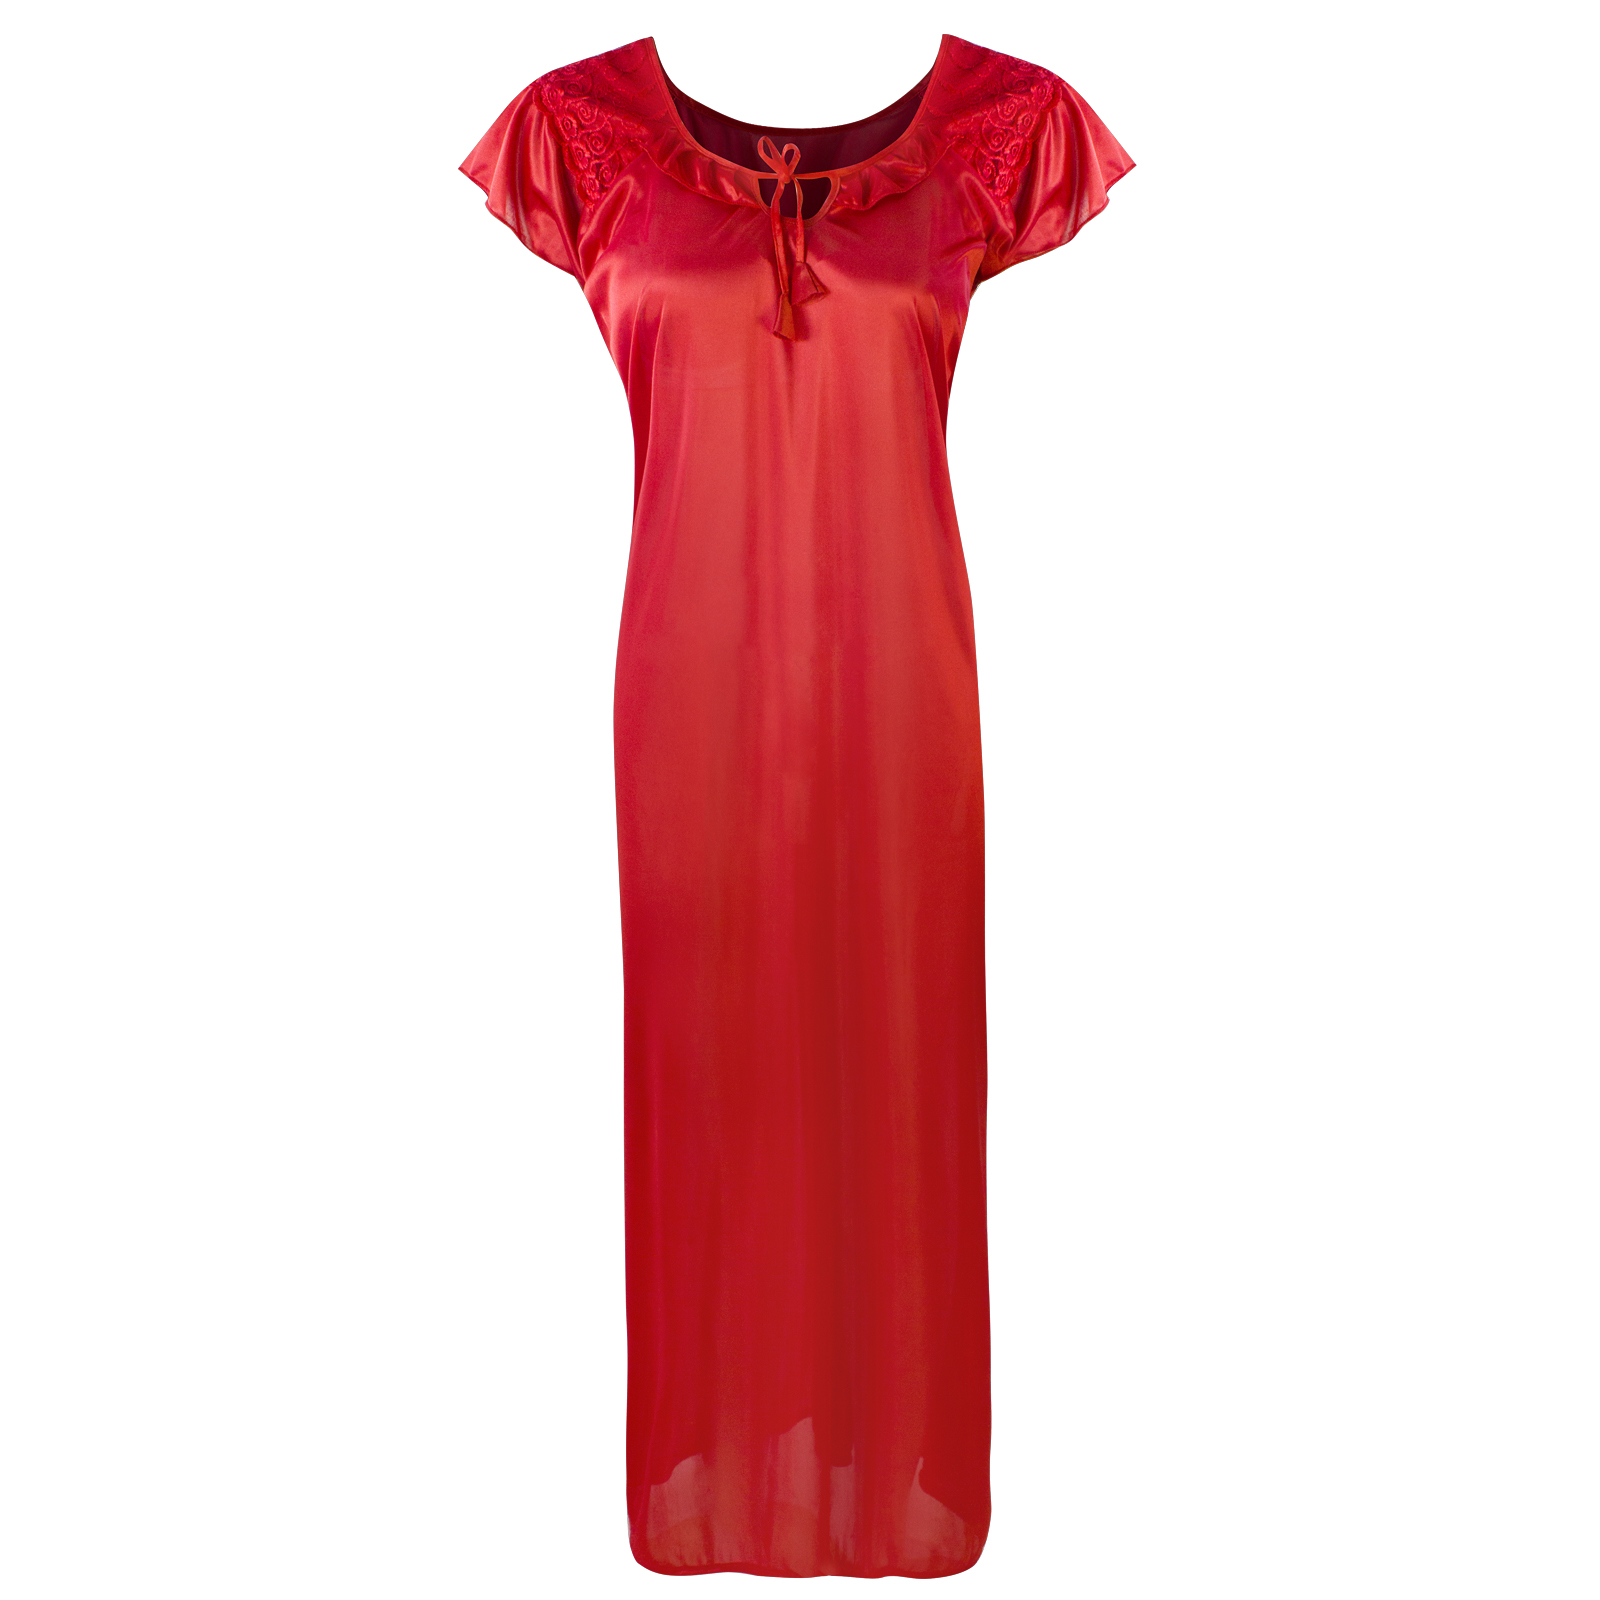 Red / 12-16 NEW LADIES PLUS SIZE BLACK LONG NIGHTDRESS NIGHTIE LOUNGER PLUS SIZE The Orange Tags